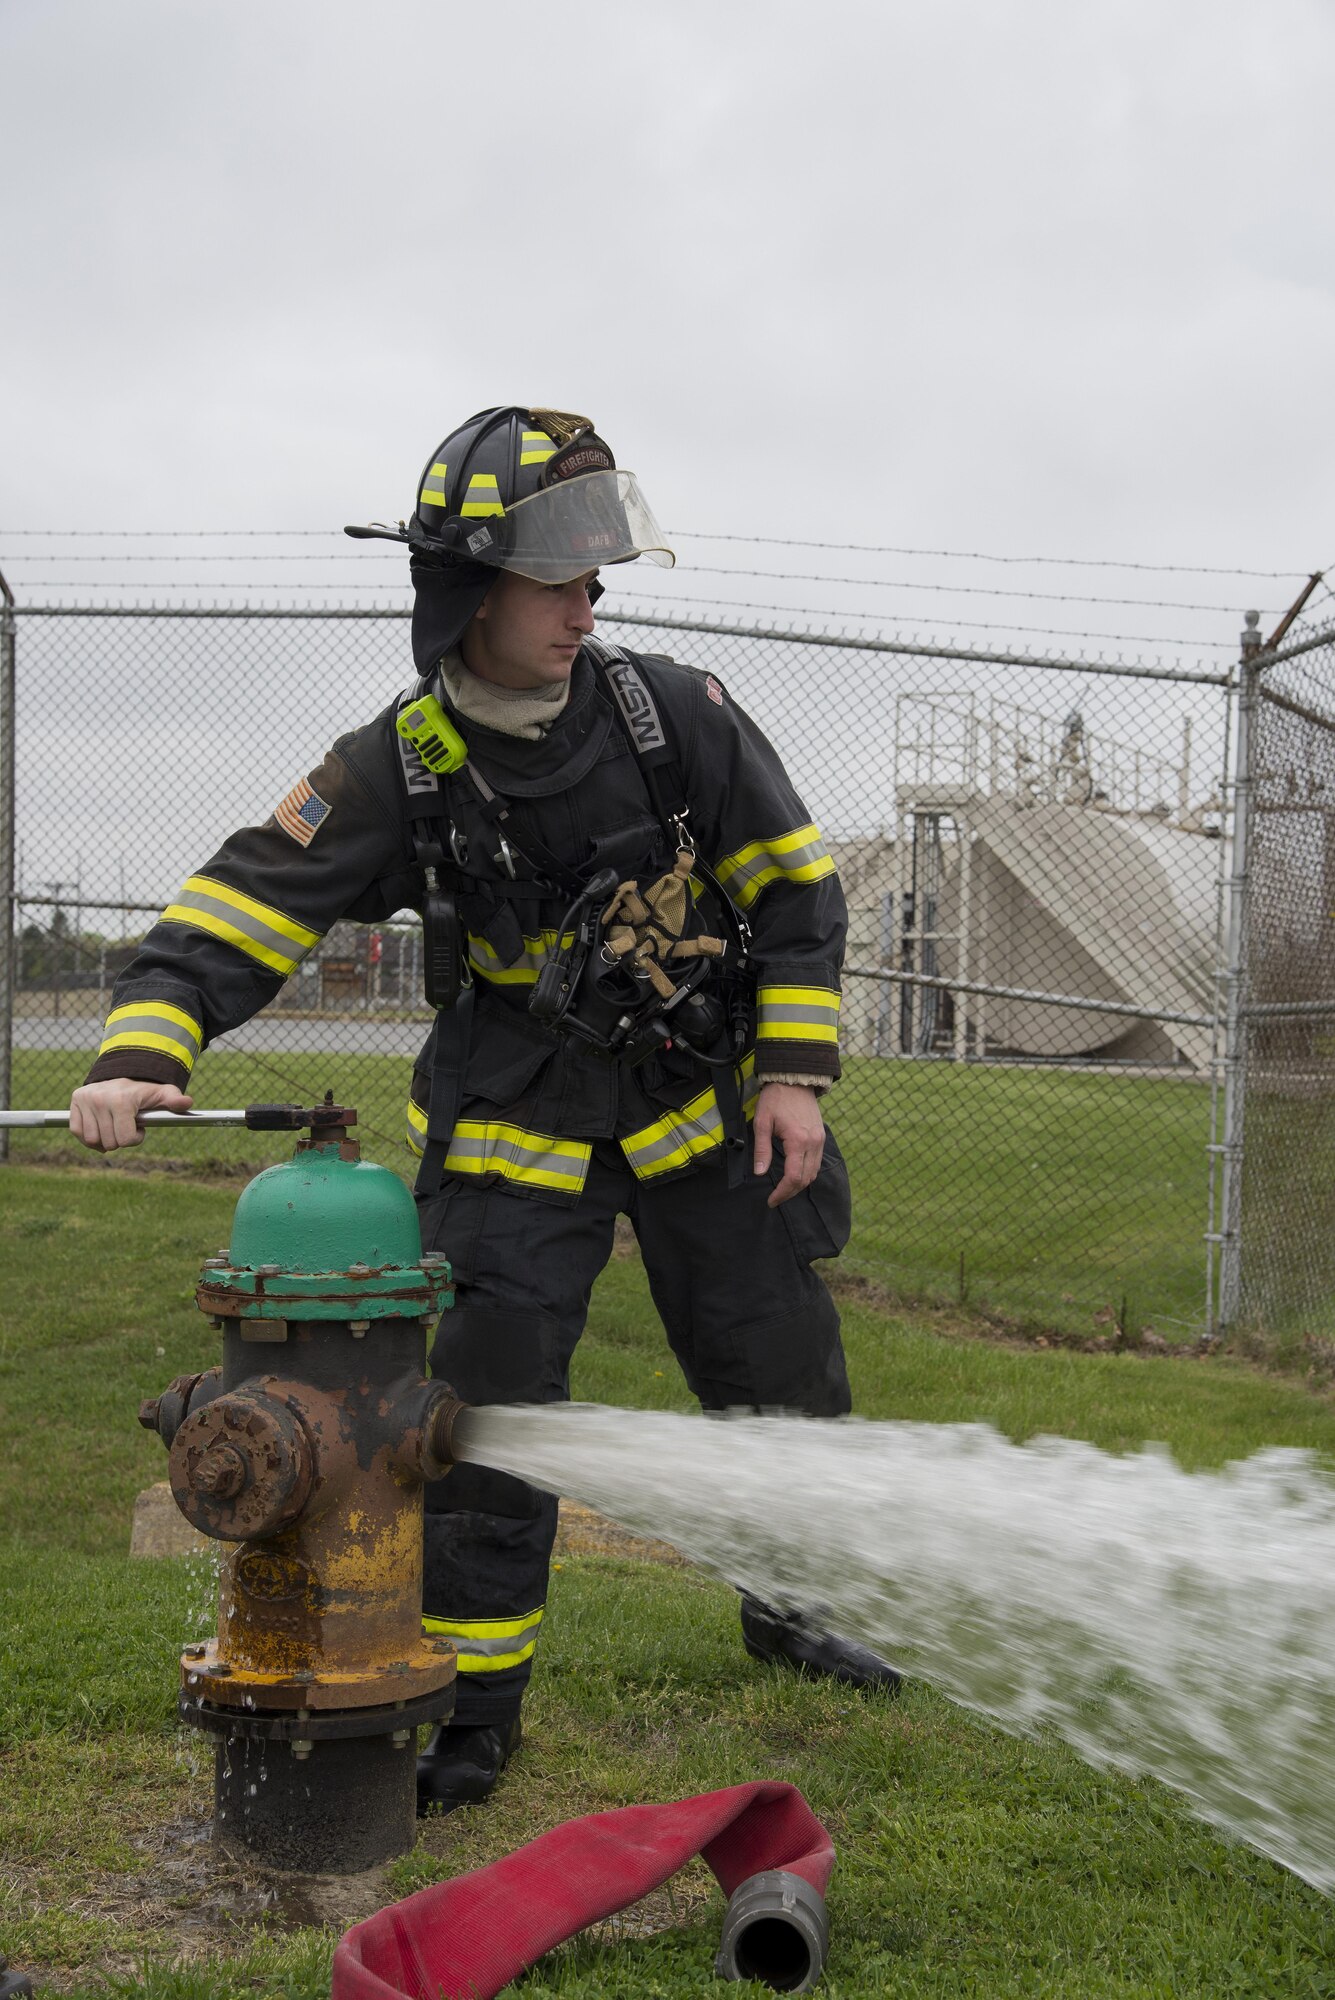 Senior Airman Seth Bollmann, 436th Civil Engineer Squadron Fire Department driver operator, opens a hydrant prior to filling a firetruck’s onboard water reservoir during a fuel spill exercise April 20, 2017, at Dover Air Force Base, Del. Members of the fire department demonstrated equipment functionality and knowledge at the direction of the Wing Inspection Team evaluators. (U.S. Air Force photo by Senior Airman Aaron J. Jenne)